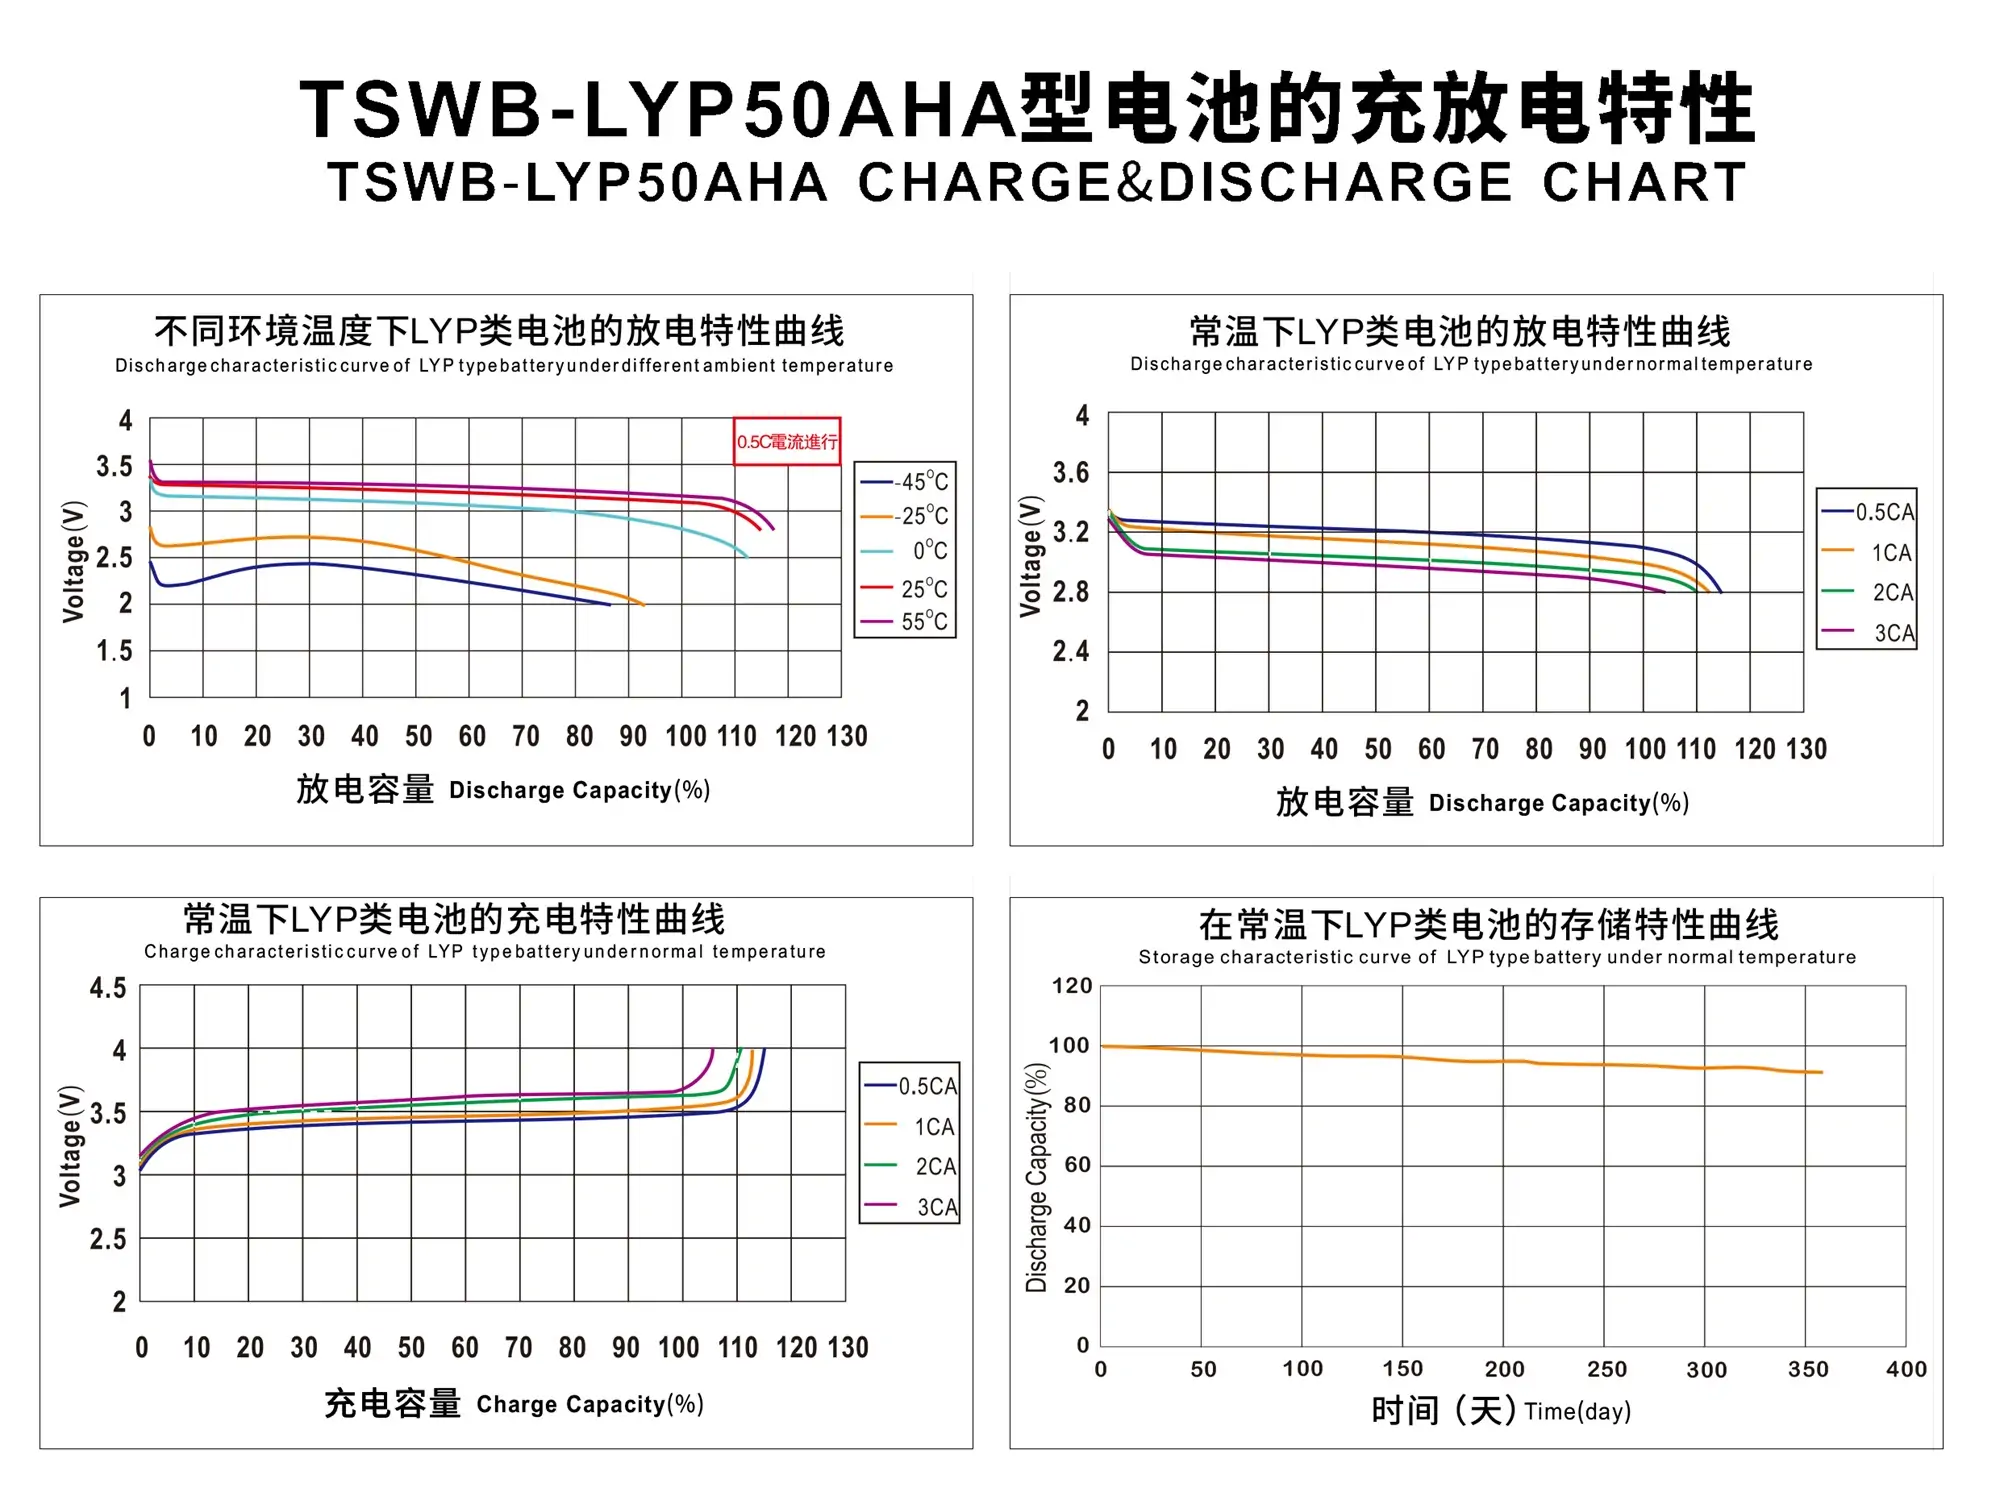 tswb-lyp50aha charge and discharge curve